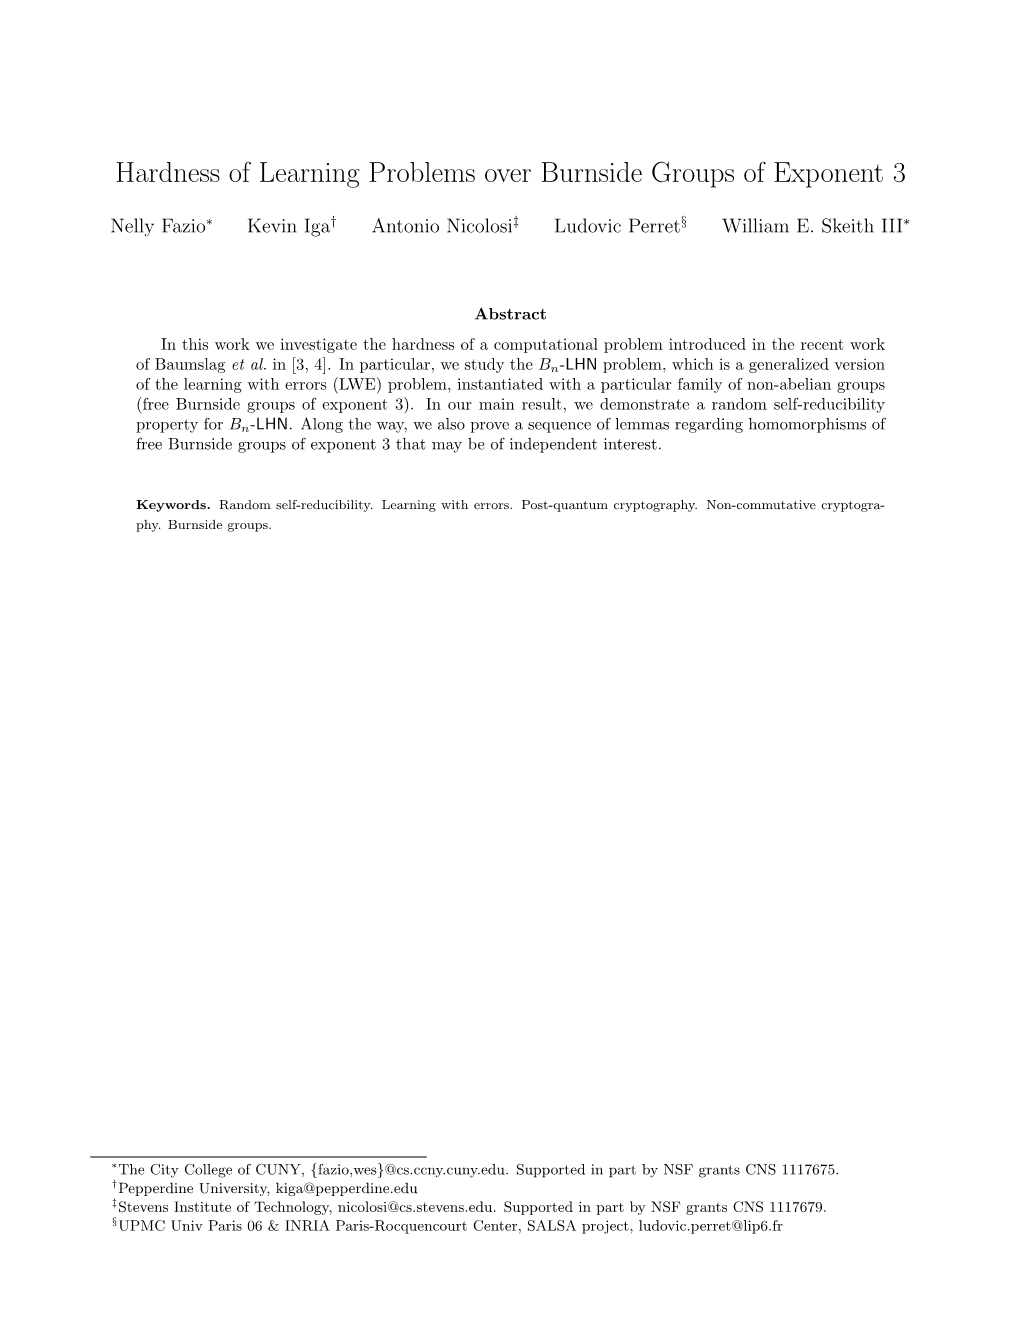 Hardness of Learning Problems Over Burnside Groups of Exponent 3